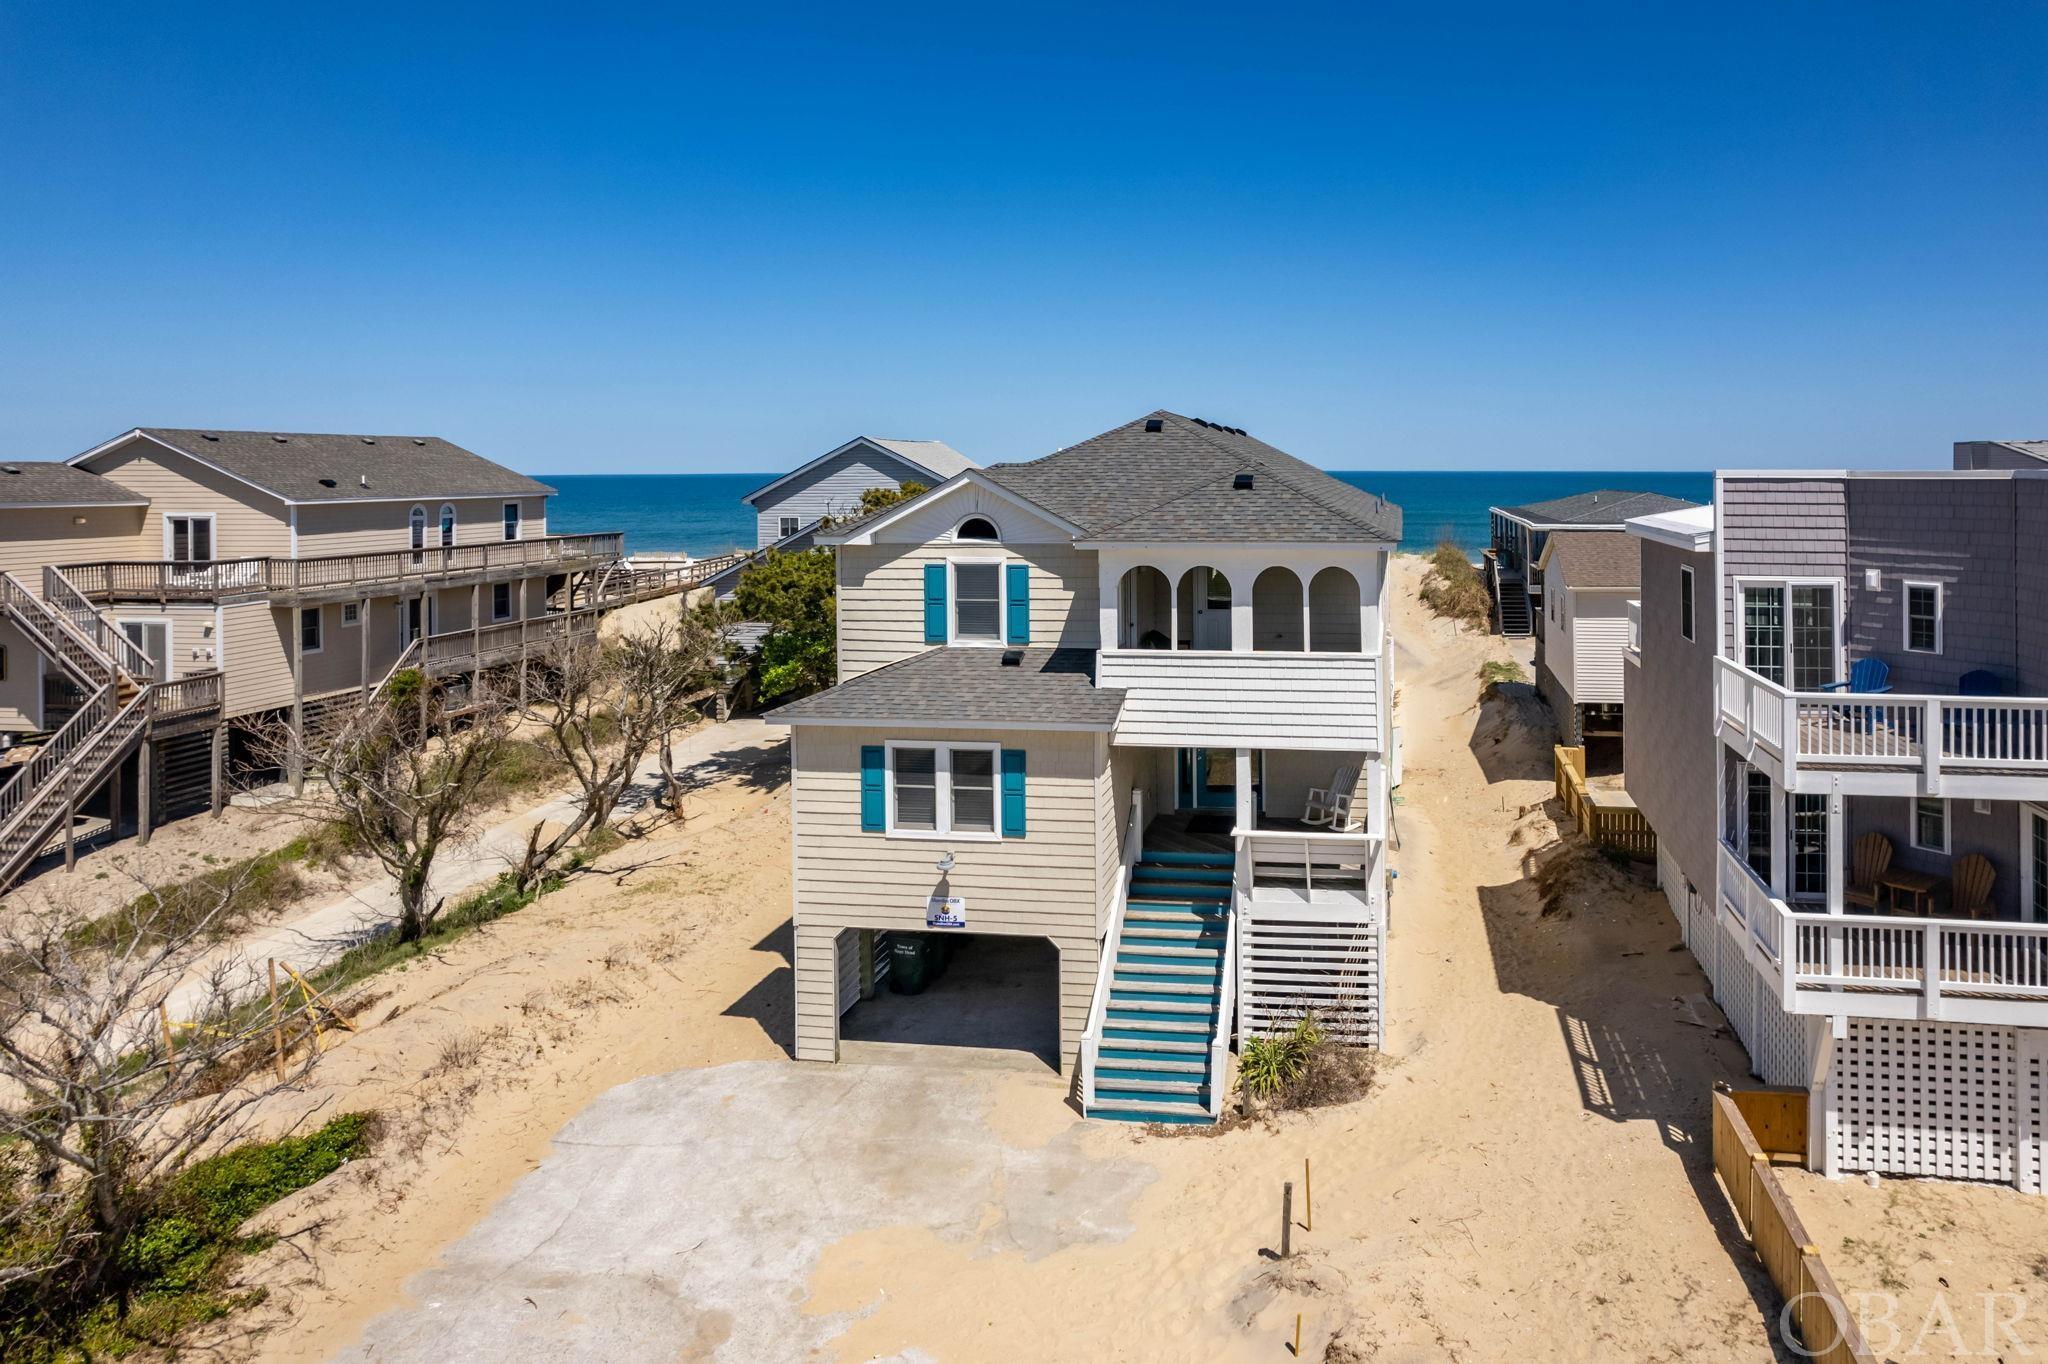 Welcome to your dreamy, not only updated, but upgraded oceanfront home in the heart of Nags Head! This stunning 8-bedroom, 5.5-bathroom coastal gem has everything you and your guests need, and want, for the perfect memorable vacation. Major repairs have already been skillfully completed making it essentially turn-key and more than ready to enjoy! With an impressive $203,668 in rental income in 2022, you simply can't go wrong!  Step inside and be captivated by unobstructed ocean views through the brand new windows. The top-level living room features new furniture, providing a comfortable and luxurious place to relax. The kitchen shines with granite countertops and stainless appliances, and there is ample dining and lounging space, including a breakfast nook with an extra refrigerator, a formal dining area and bar seating.  The mid-level deck, with a hot tub overlooking the pool and vegetated protective dune, is the perfect place to unwind after a day of exploring. Bedrooms are spacious and the layout is perfectly crafted for the ultimate vacation. Lower level features fully equipped game room with wet bar, lounging furniture and easy access to outdoor entertaining areas. The pool area offers just installed Trex decking system as well as a new pool fence and gate, comfortable seating throughout and a pool heater installed for year-round swimming.  Other recent updates include a new mid-level air handler system for improved climate control, and the septic tank has been raised and pumped in 2023, ensuring a hassle-free vacation experience.  Not only is this luxurious oceanfront vacation home fully updated and rental-ready, but it's also conveniently located near some of the best attractions in Nags Head. You'll be just a stone's throw from the famous Fish Heads Pier, where you can enjoy fishing, drinks and more stunning ocean views. Plus, with easy access to nearby restaurants and shops, including the Outer Banks Mall, you'll never run out of things to do during your stay. Whether you're looking to relax and unwind or explore all that Nags Head has to offer, this vacation home is the perfect base for your next coastal getaway. Don't miss it!  With all these updates and upgrades completed, this property is fully rental-ready and perfect for your next vacation. Don't miss out on the chance to experience luxury living in one of the most sought-after locations on the coast!